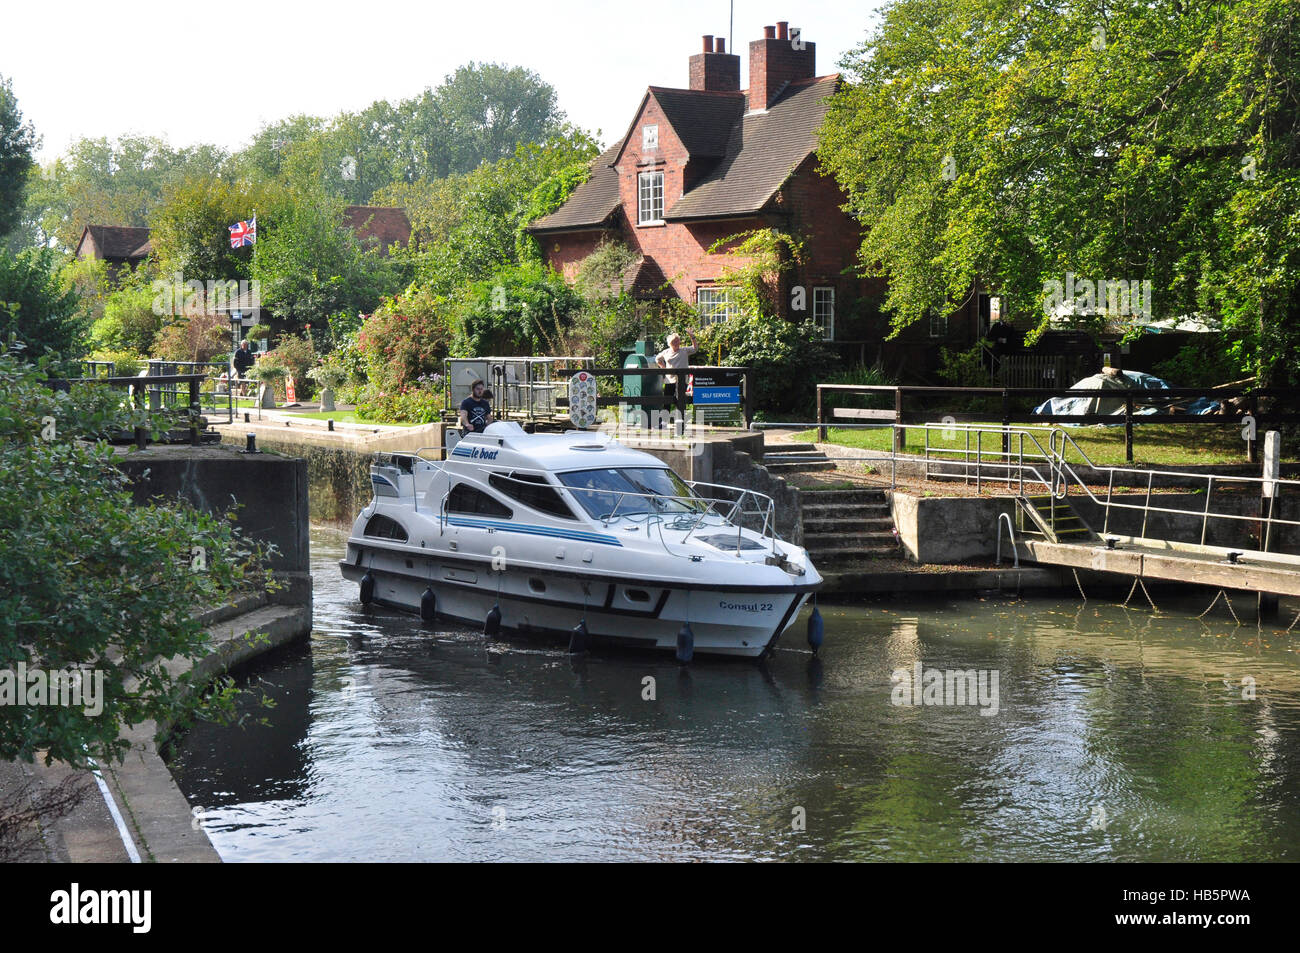 Berkshire - Sonning Lock - river Thames - pleasure cruiser leaving the lock - sunlight and shadows - reflections - cottage Stock Photo